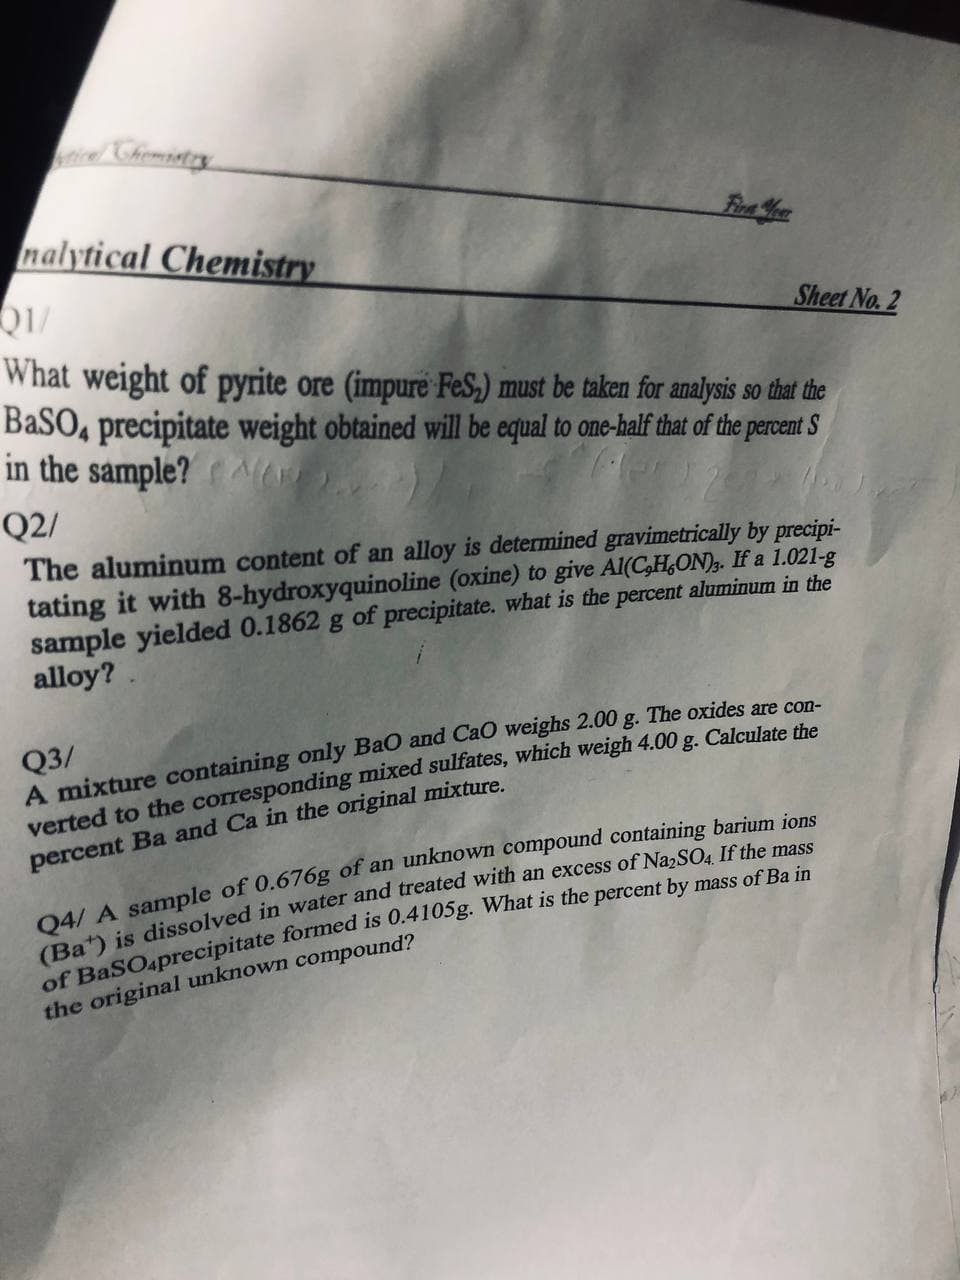 icel Chiemistry
nalytical Chemistry
Sheet No. 2
What weight of pyrite ore (impure FeS,) must be taken for analysis so that the
BASO, precipitate weight obtained will be equal to one-half that of the percent S
in the sample? NAr
Q2/
The aluminum content of an alloy is determined gravimetrically by precipi-
tating it with 8-hydroxyquinoline (oxine) to give Al(C,H,ON). If a 1.021-g
sample yielded 0.1862 g of precipitate. what is the percent aluminum in the
alloy?
Q3/
A mixture containing only BaO and CaO weighs 2.00 g. The oxides are con-
verted to the corresponding mixed sulfates, which weigh 4.00 g. Calculate the
percent Ba and Ca in the original mixture.
04/ A sample of 0.676g of an unknown compound containing barium jons
excess of NazSO4. If the mass
(Ba) is dissolved in water and treated with
the original unknown compound?
